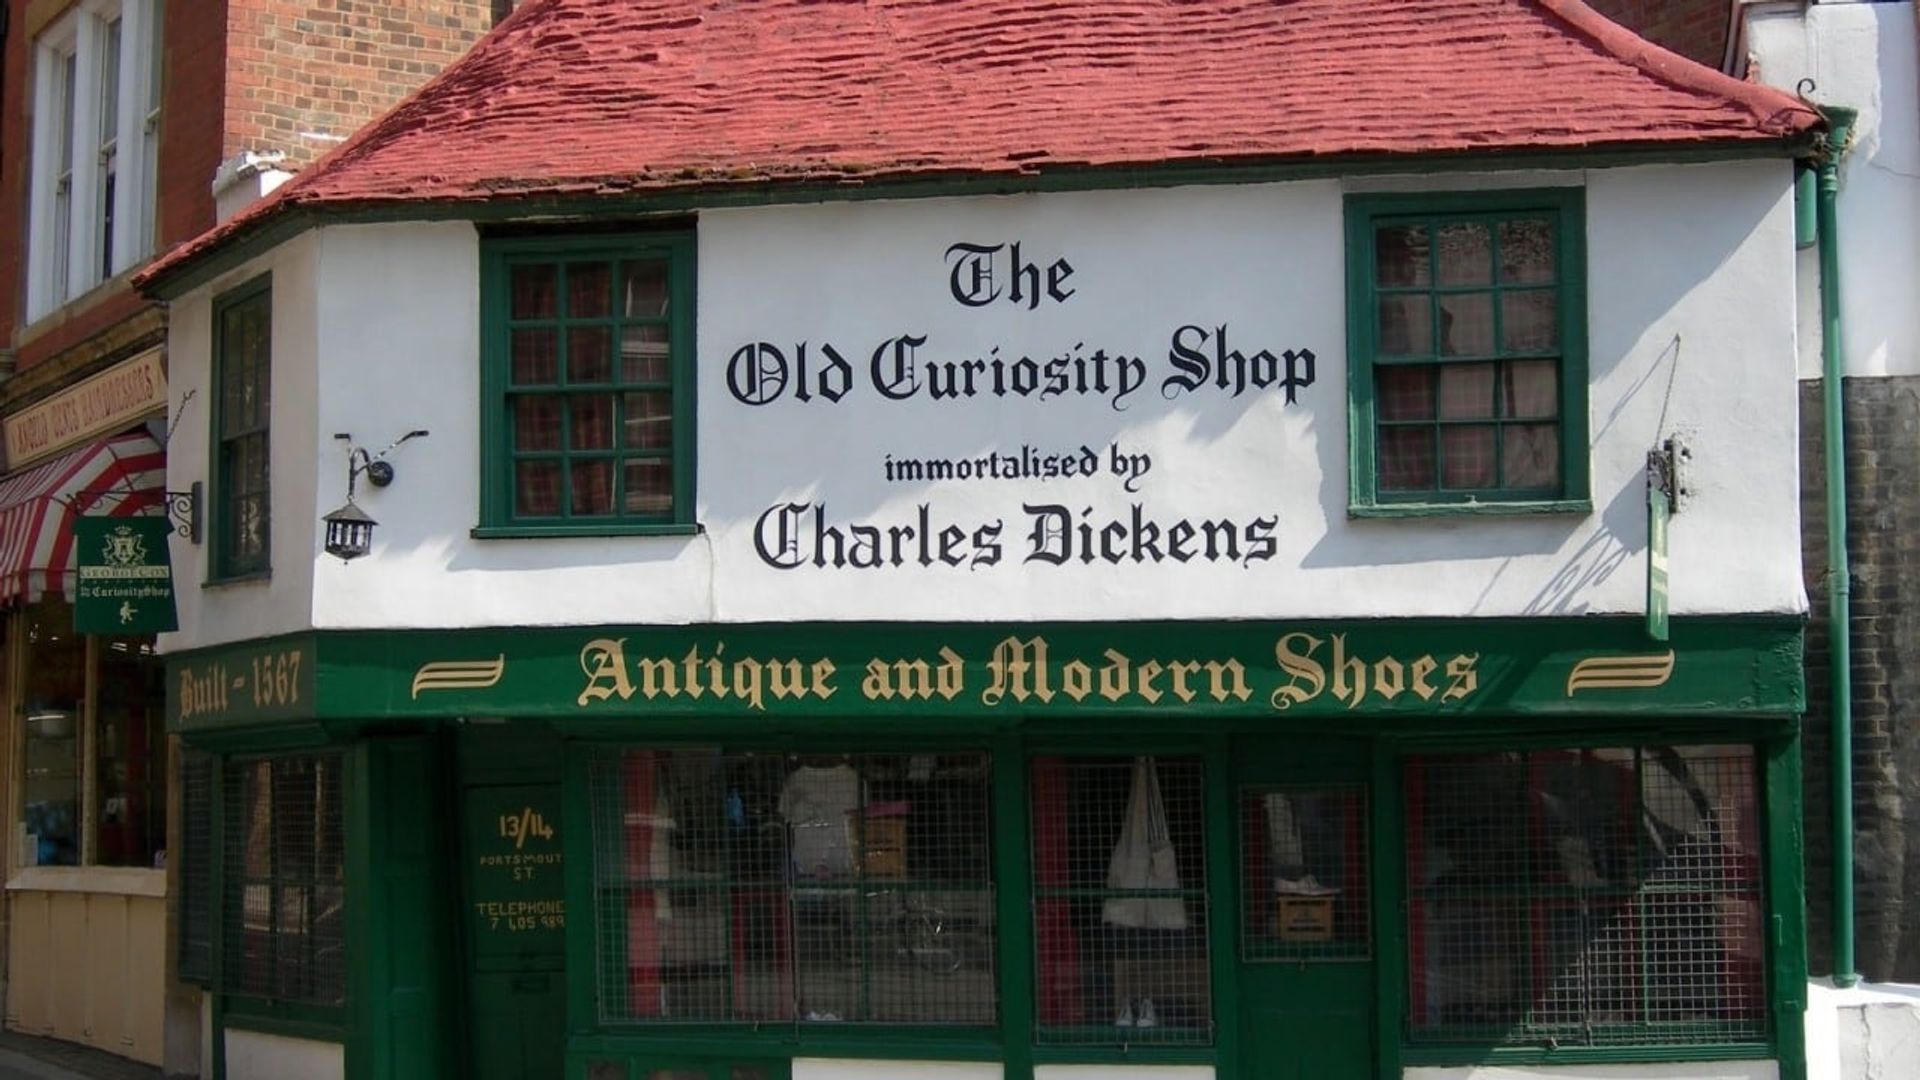 The Old Curiosity Shop background